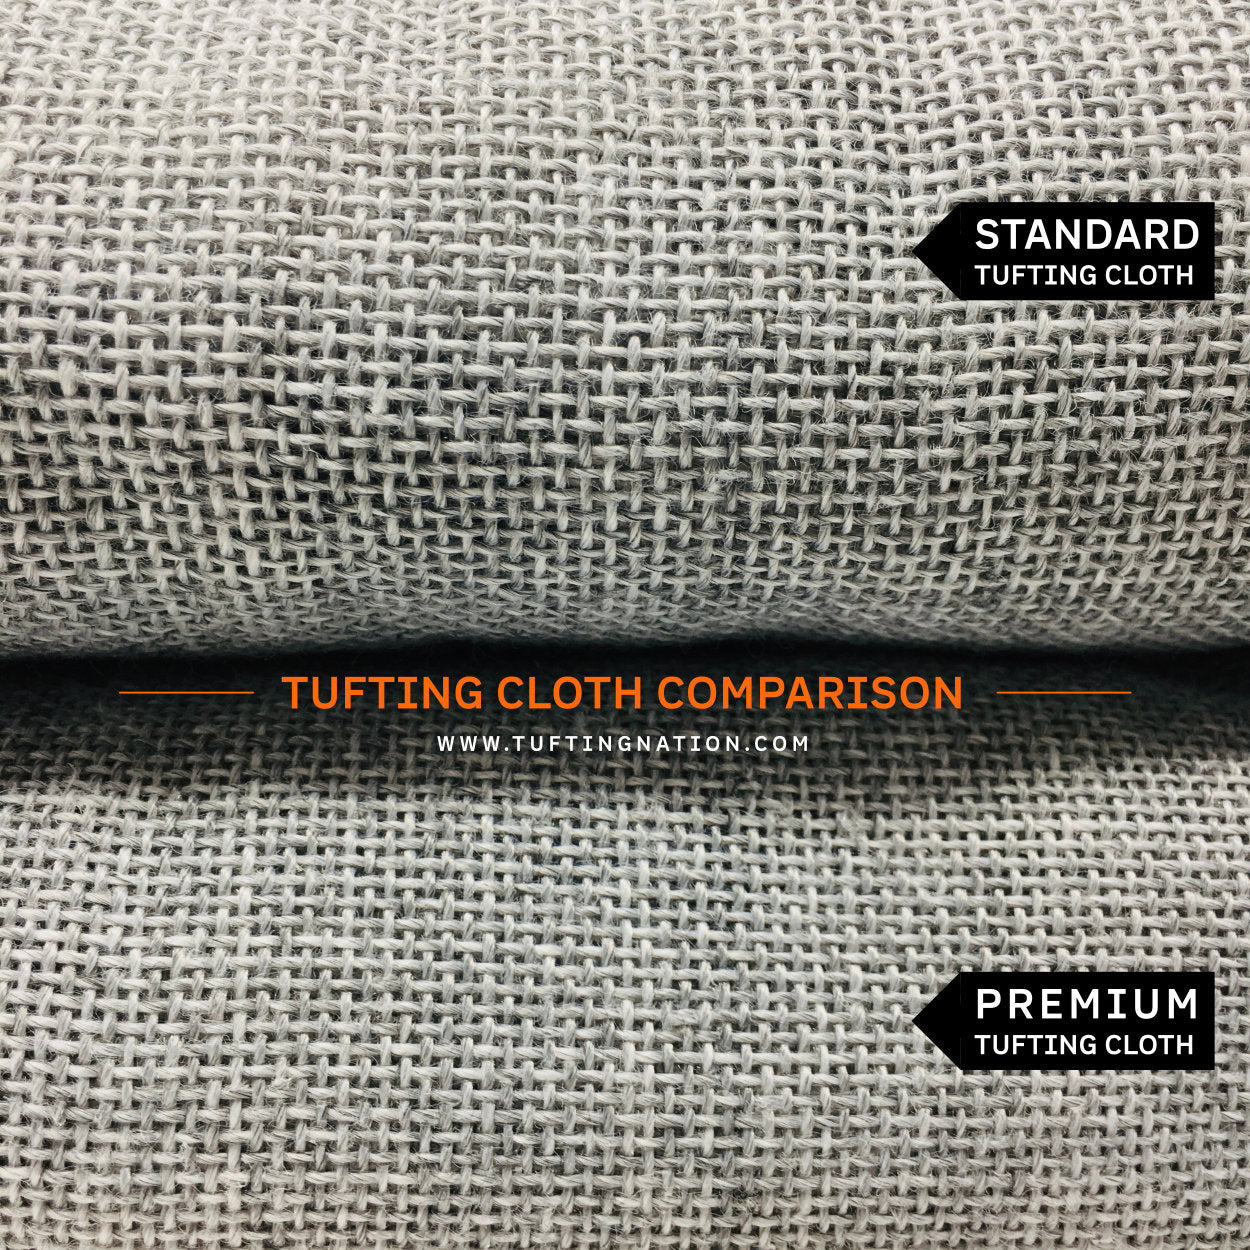 Close up that shows the difference between the Standard and Premium Tufting Cloth | TuftingNation